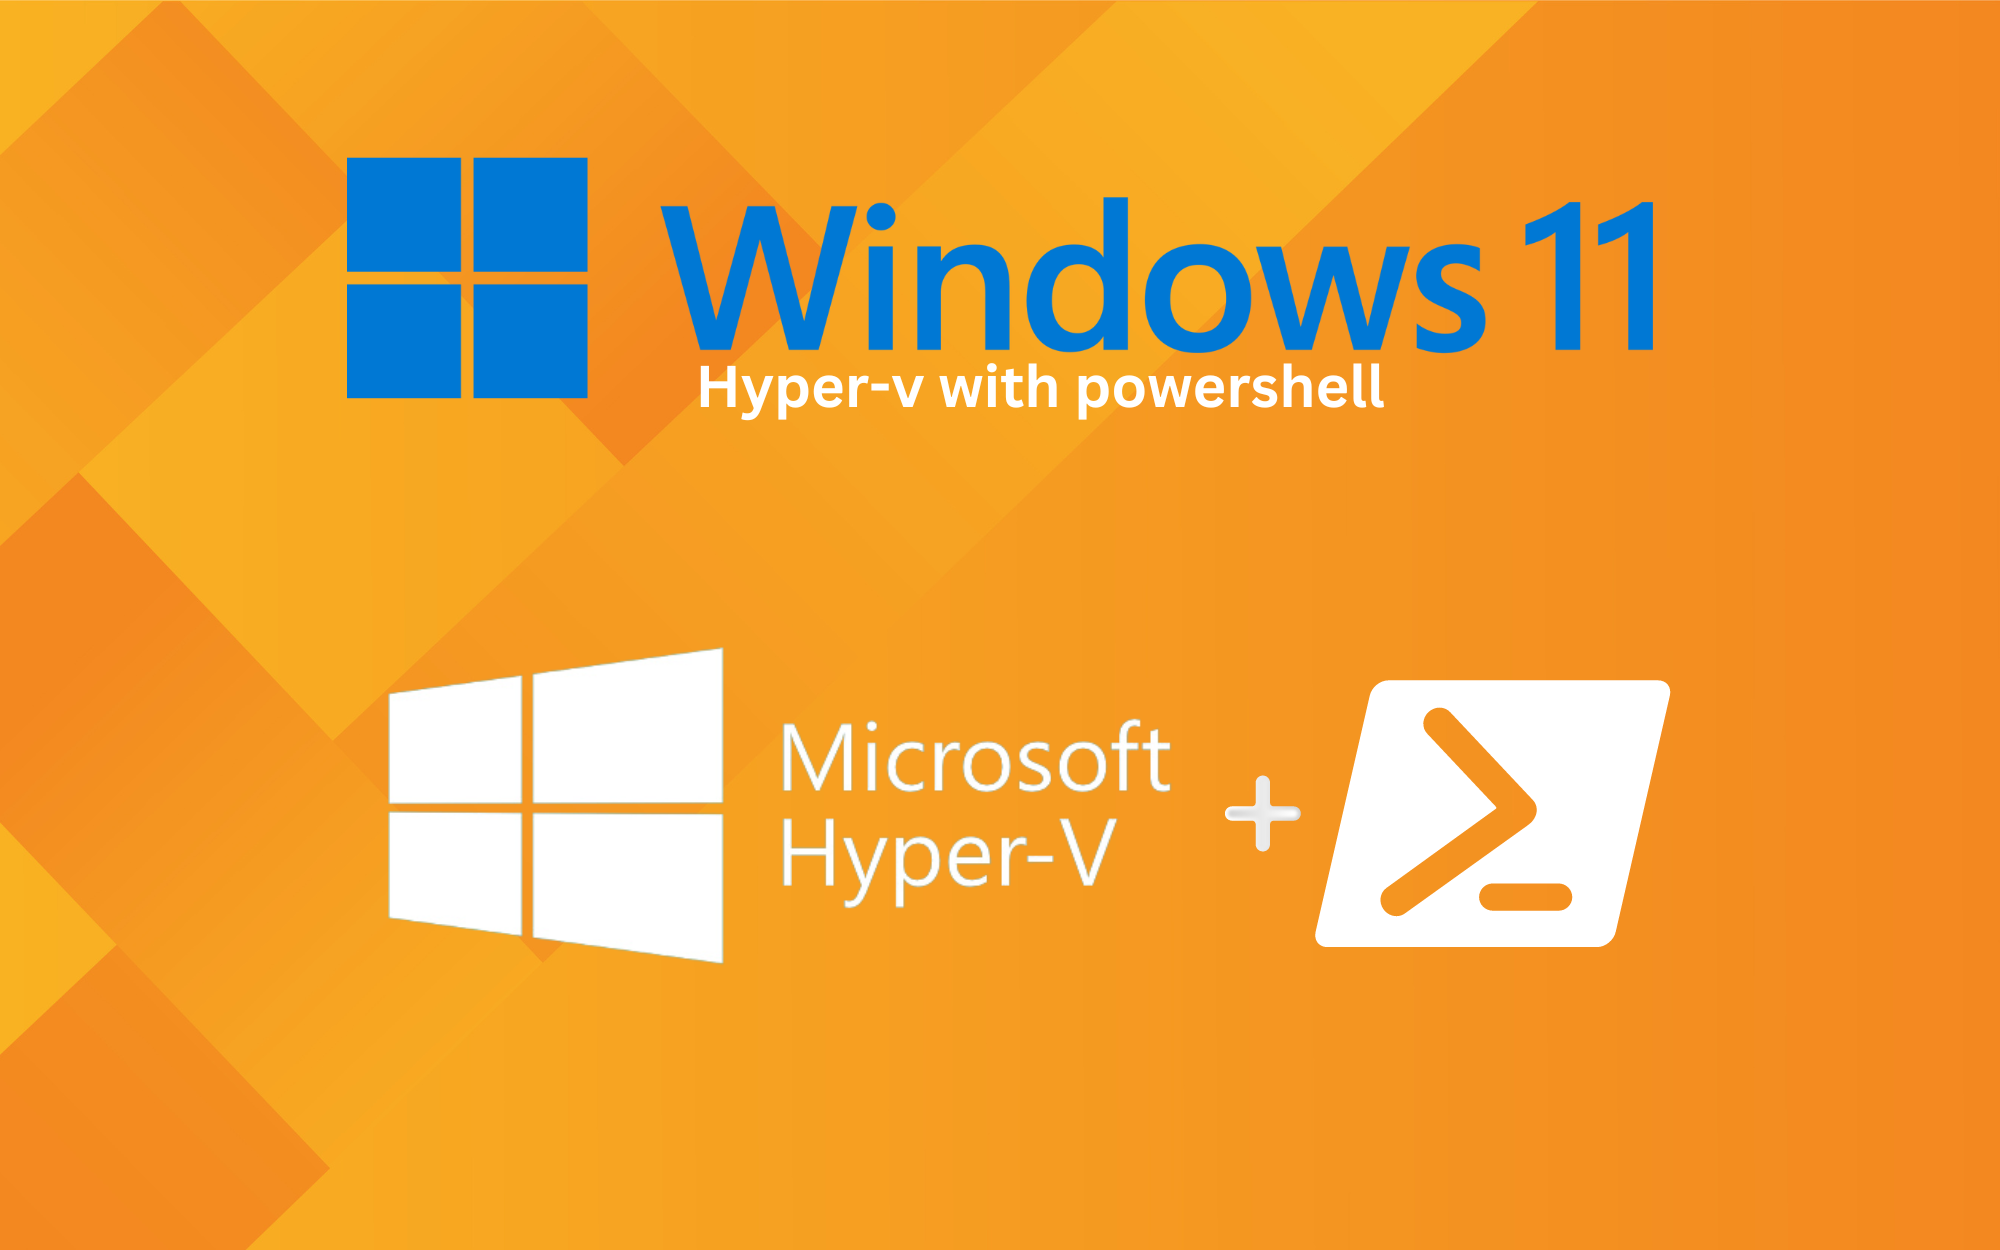 Step-by-Step Guide: Enabling Hyper-V on Windows 11 and Creating a VM via PowerShell